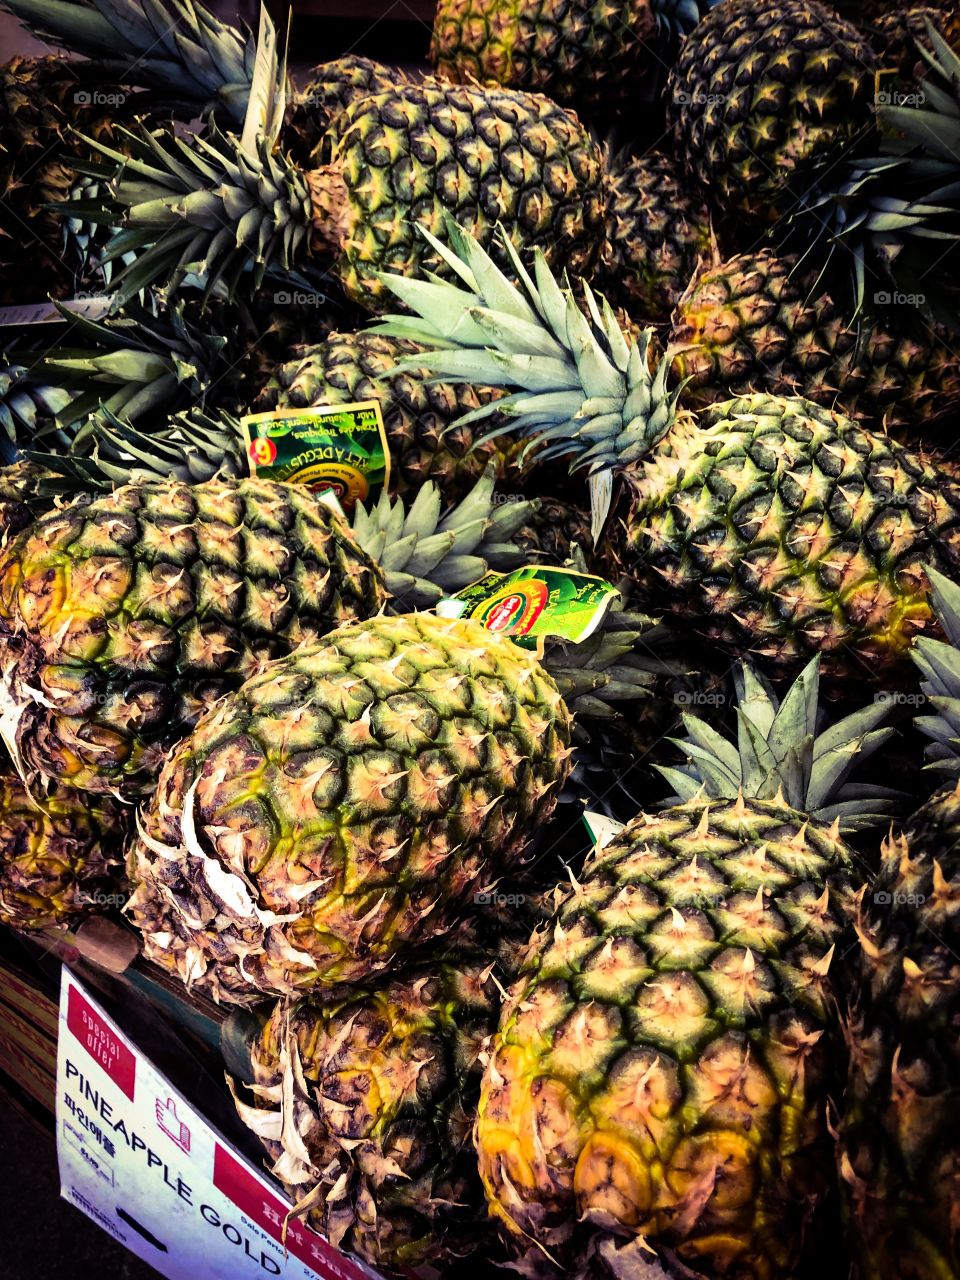 Pineapples for sale at a grocery store.